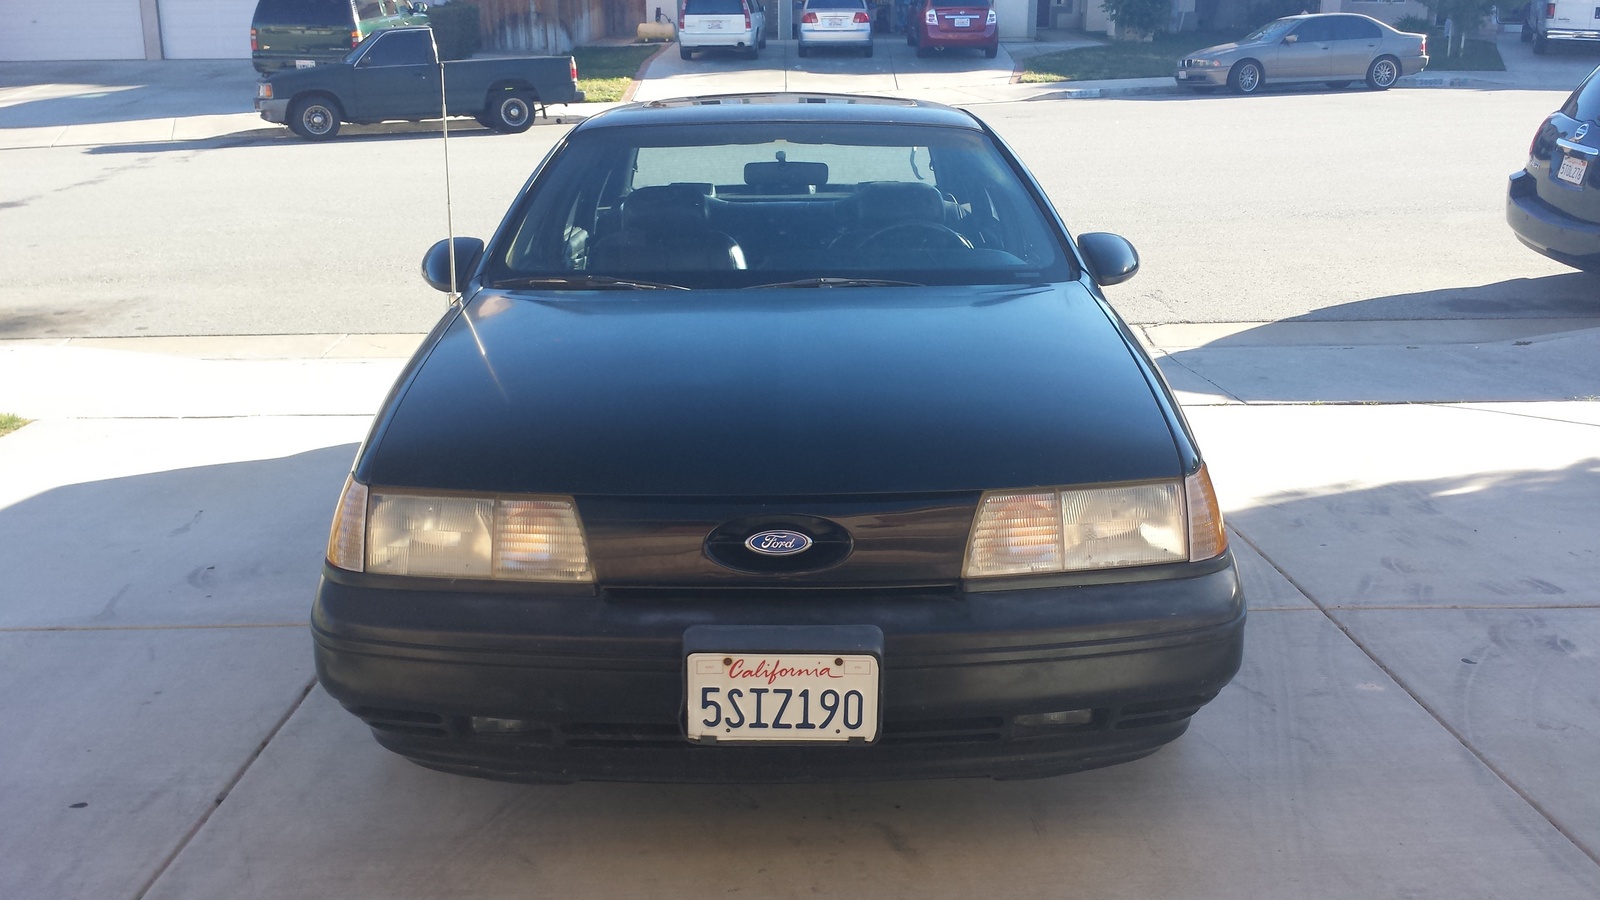 1990 Ford taurus sho review #7